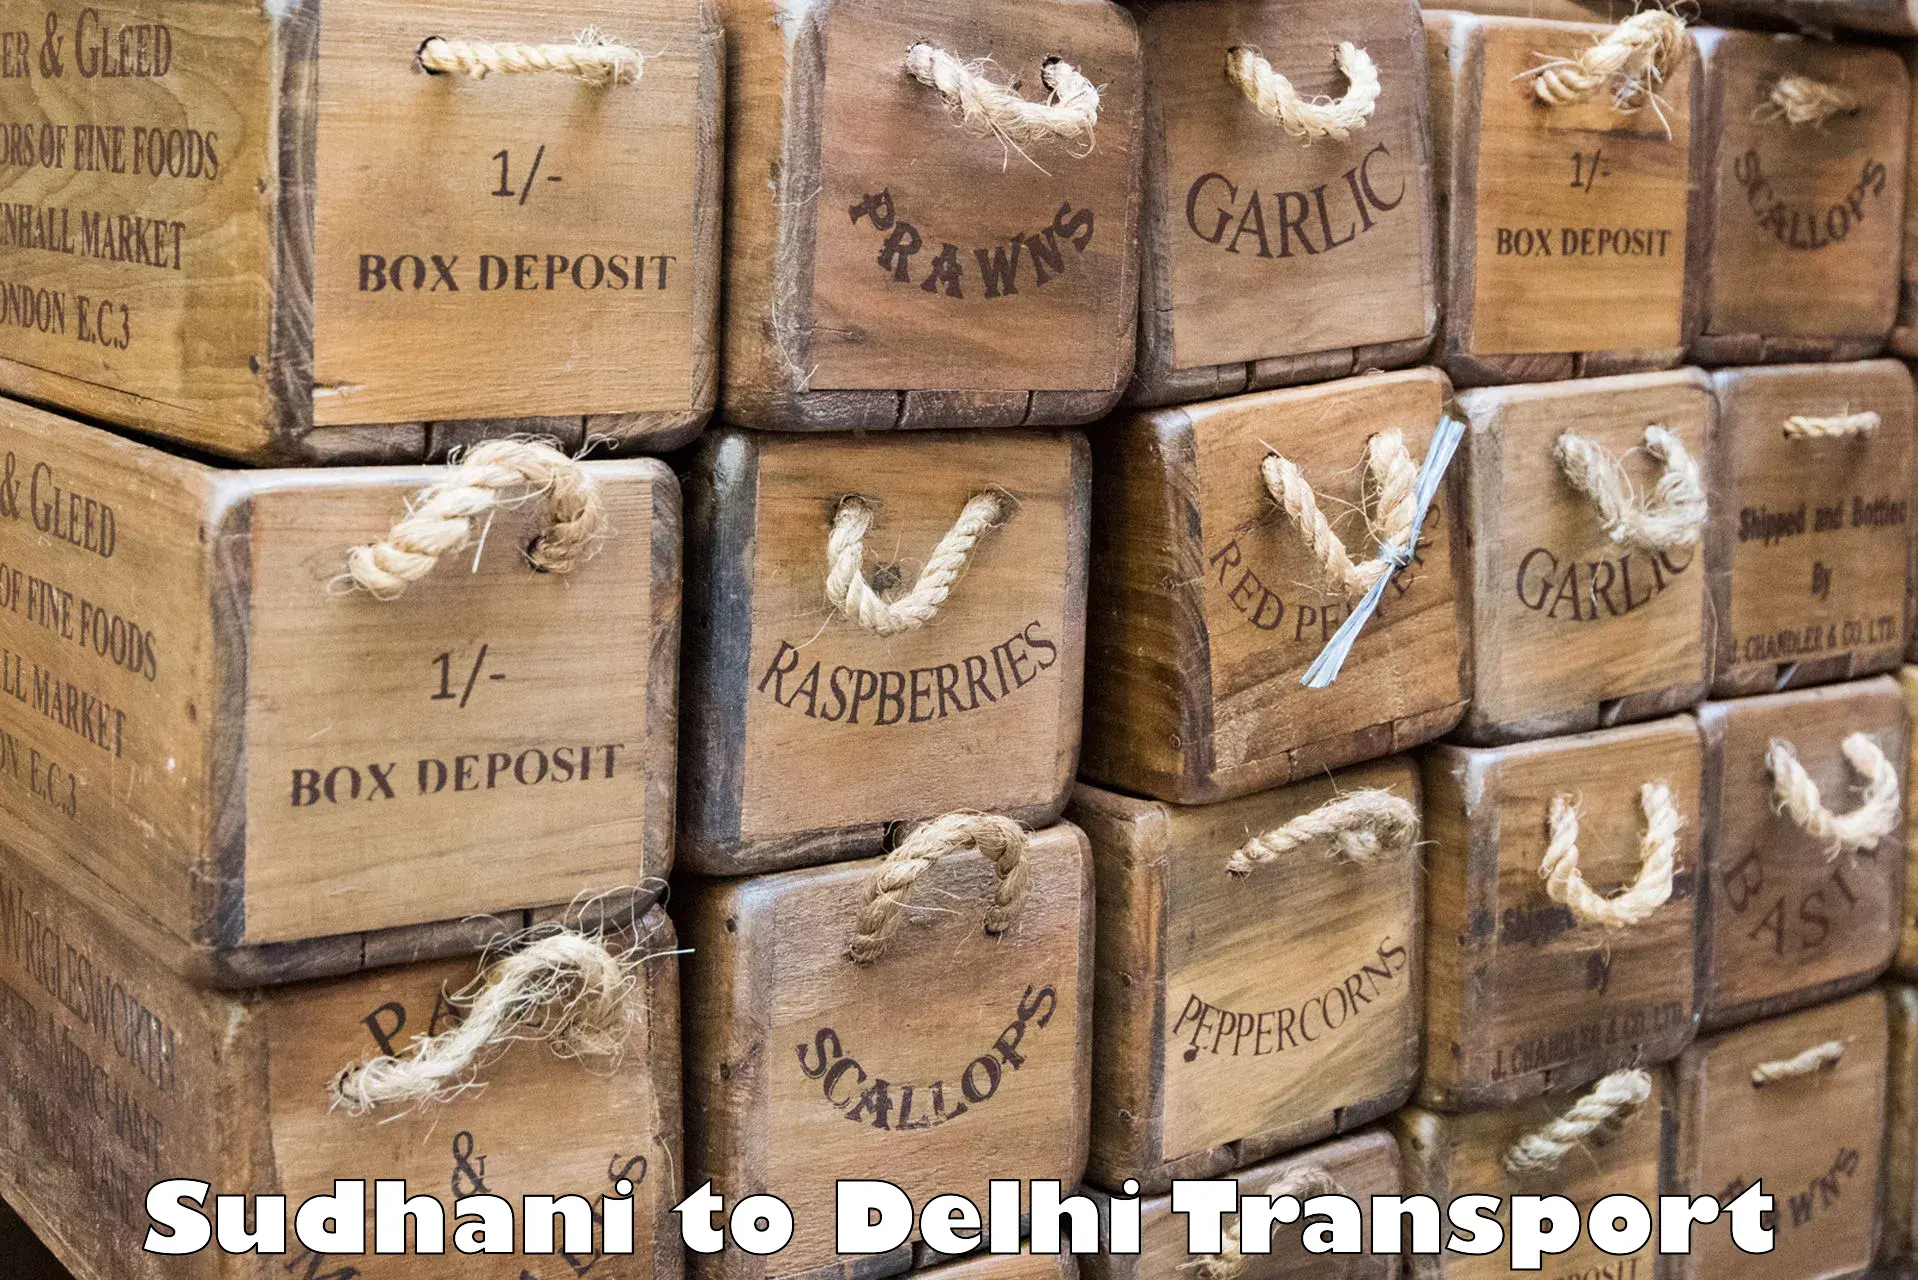 Nearby transport service Sudhani to East Delhi